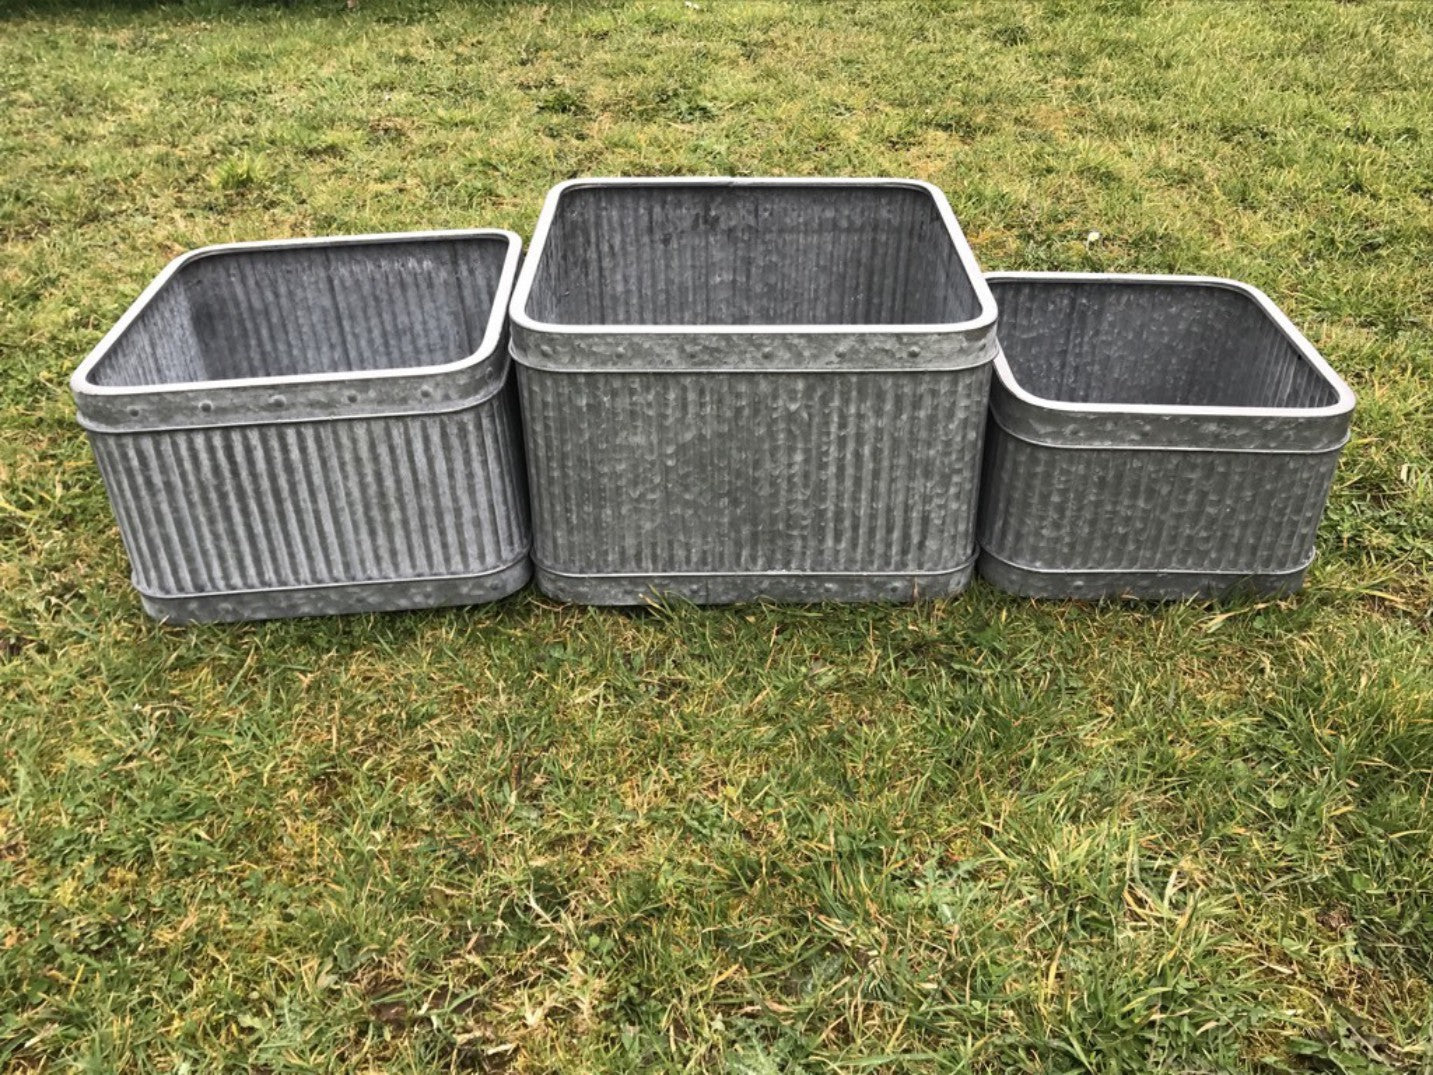 3 Galvanised Garden Planters Dolly Tub Style Ribbed Small,Medium & Large